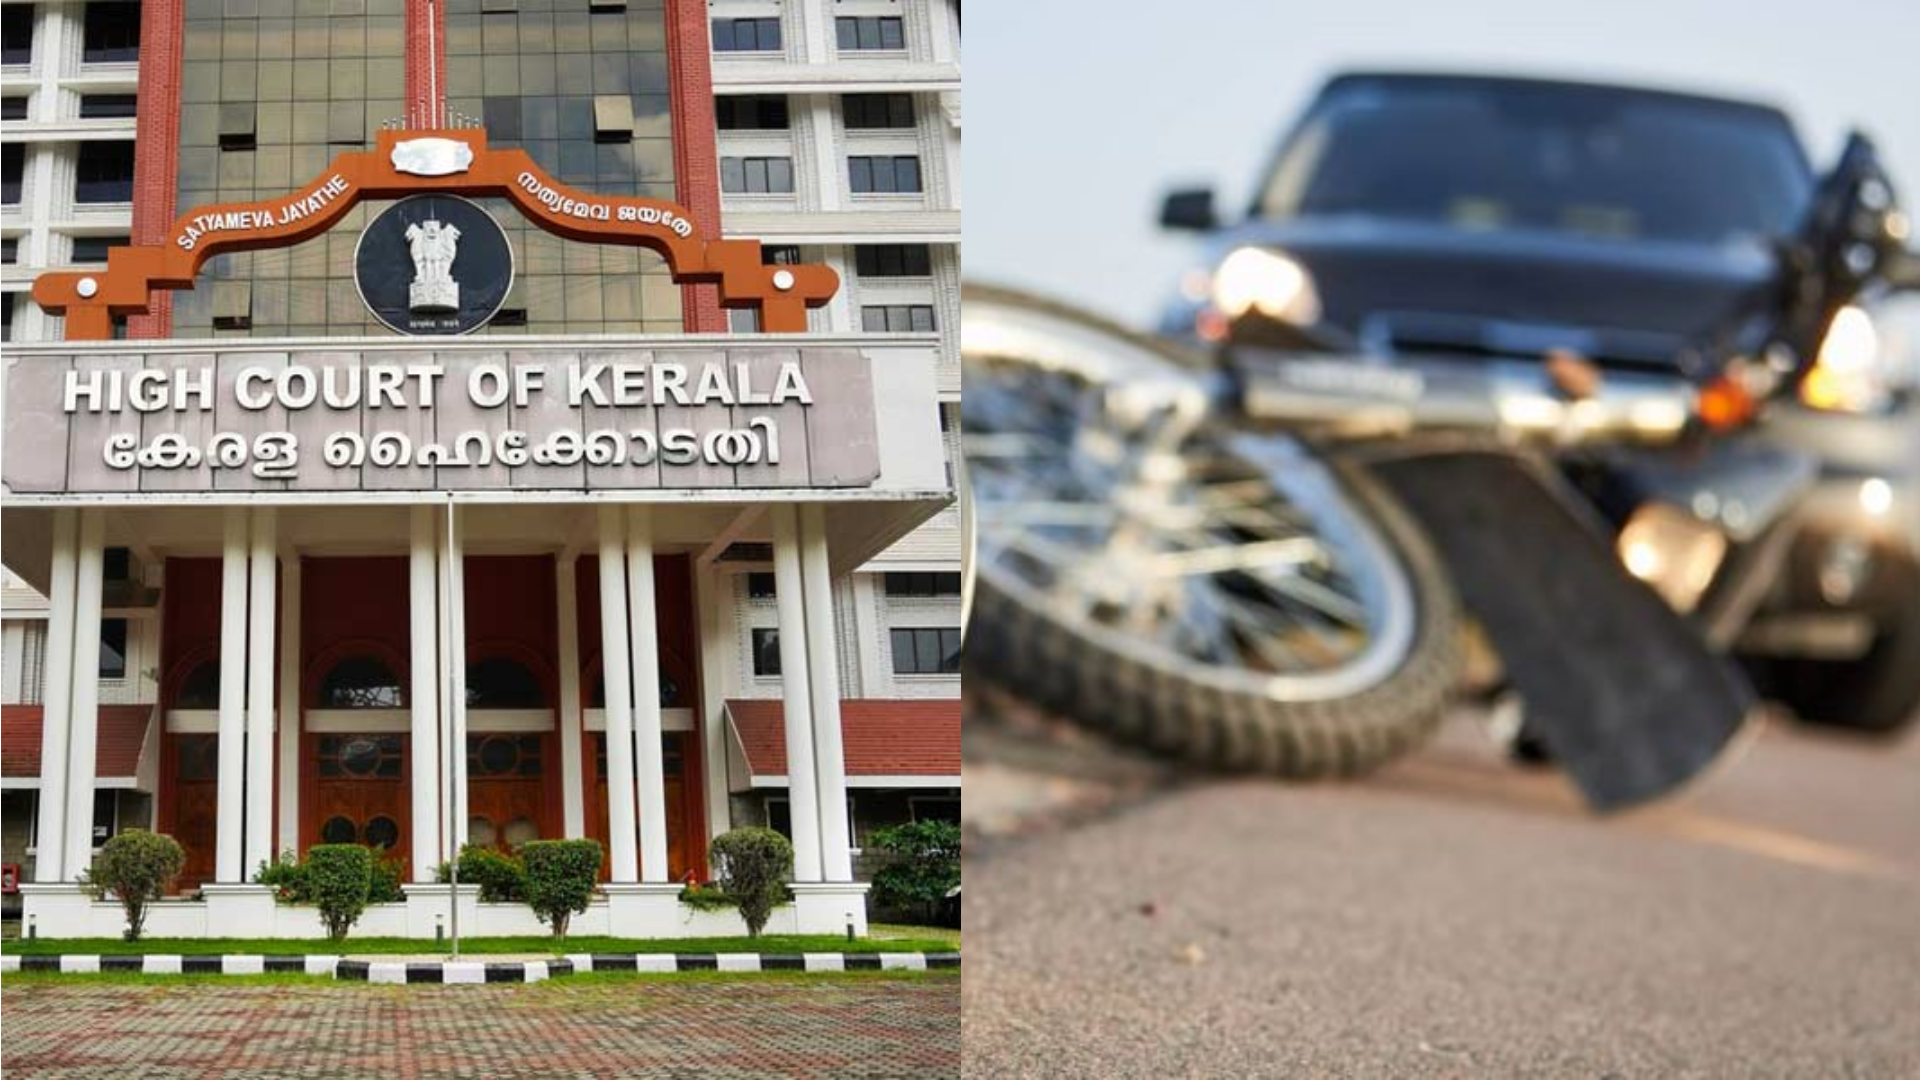 Parents Face Legal Action for Children’s Driving Mishaps, Says Kerala High Court